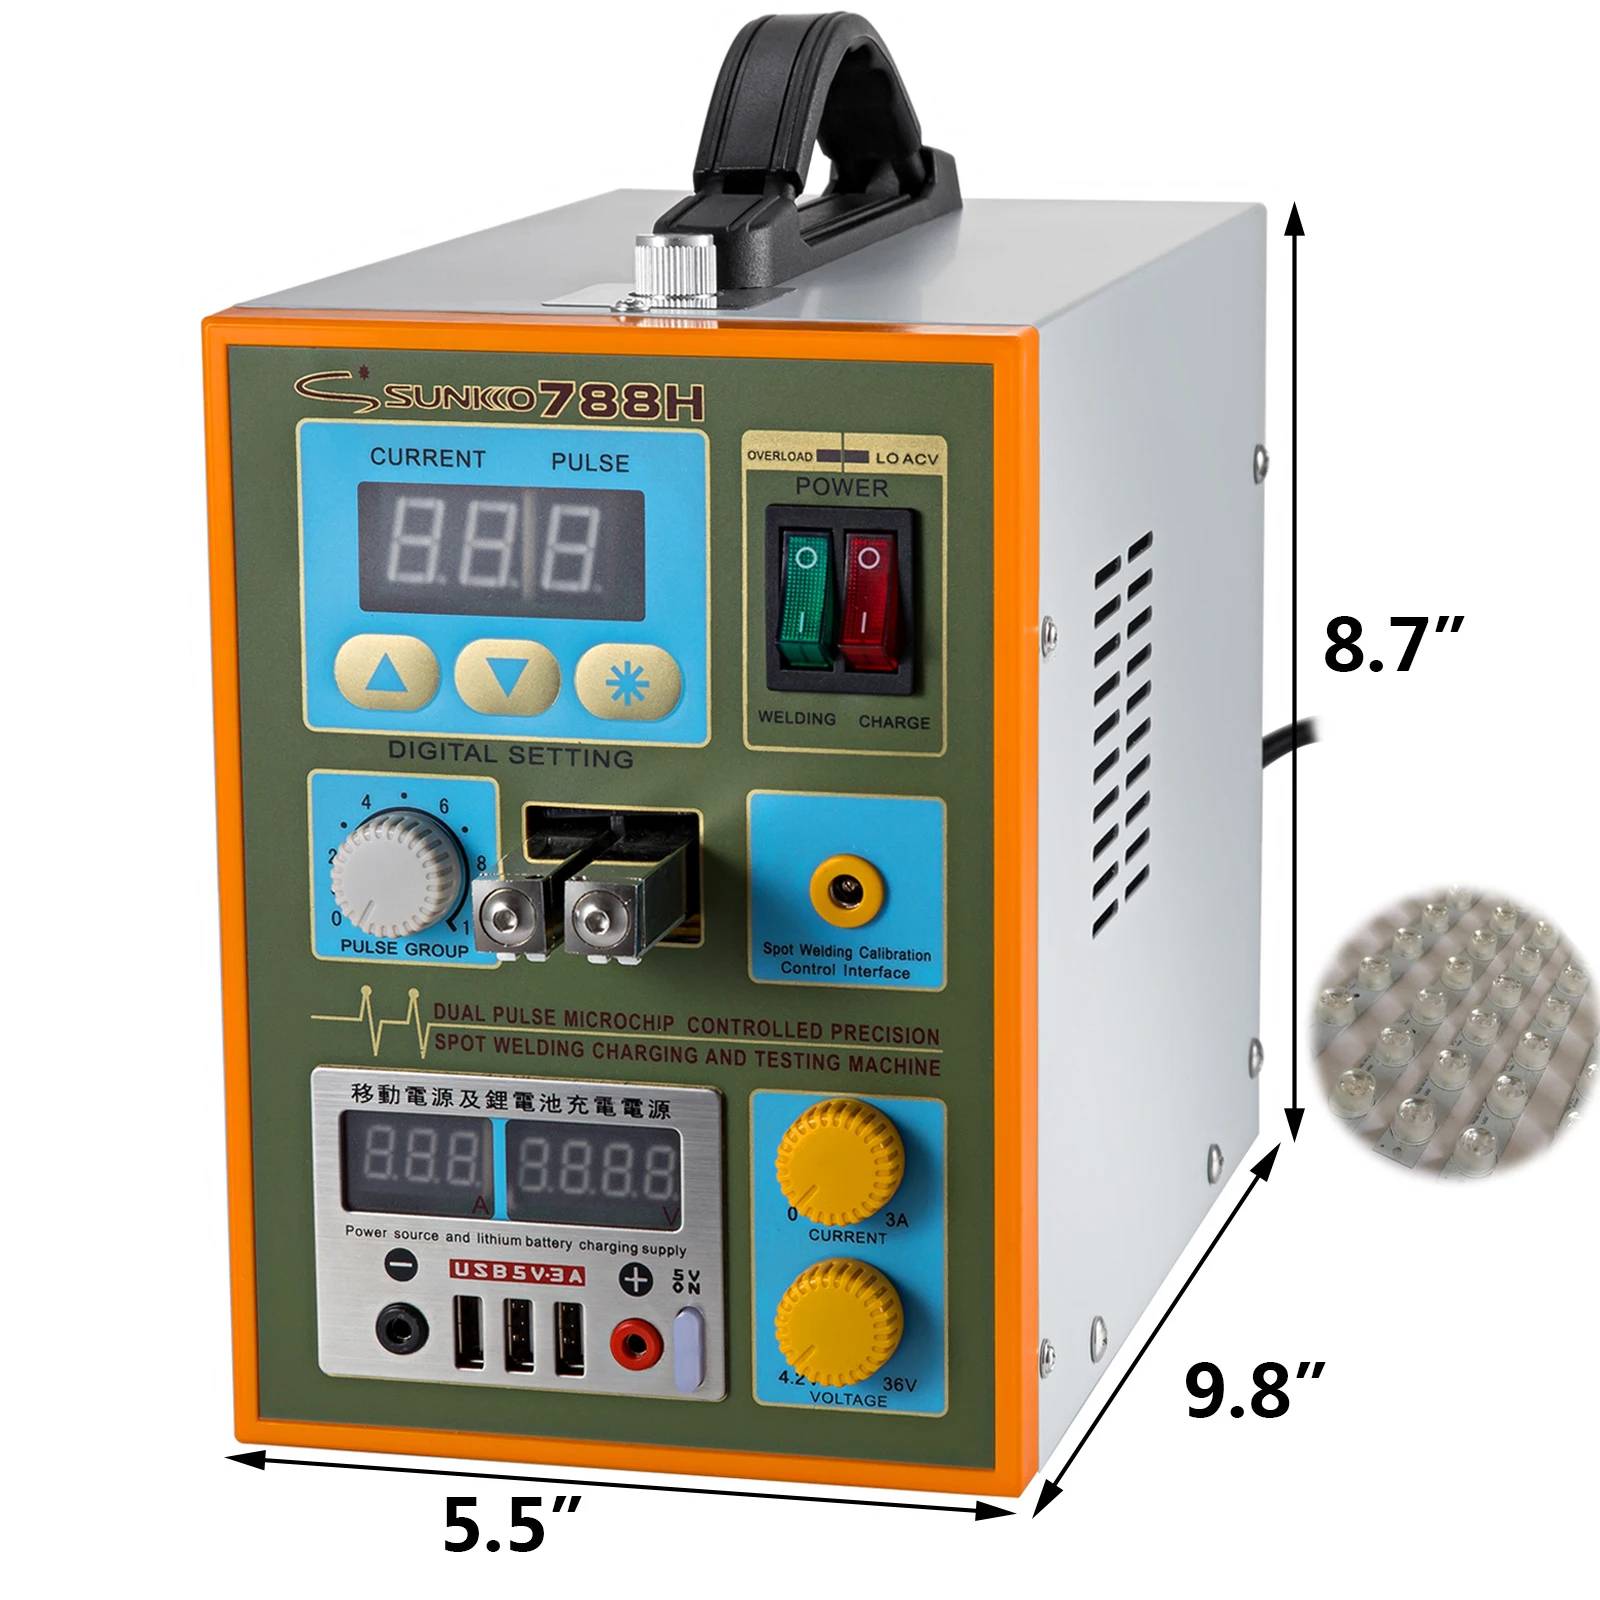 Anti-Static 788H-USB Battery Pulse Spot Welder w/ 1Kg Nickel Plated Steel Strip for 18650 With LED Lighting Function